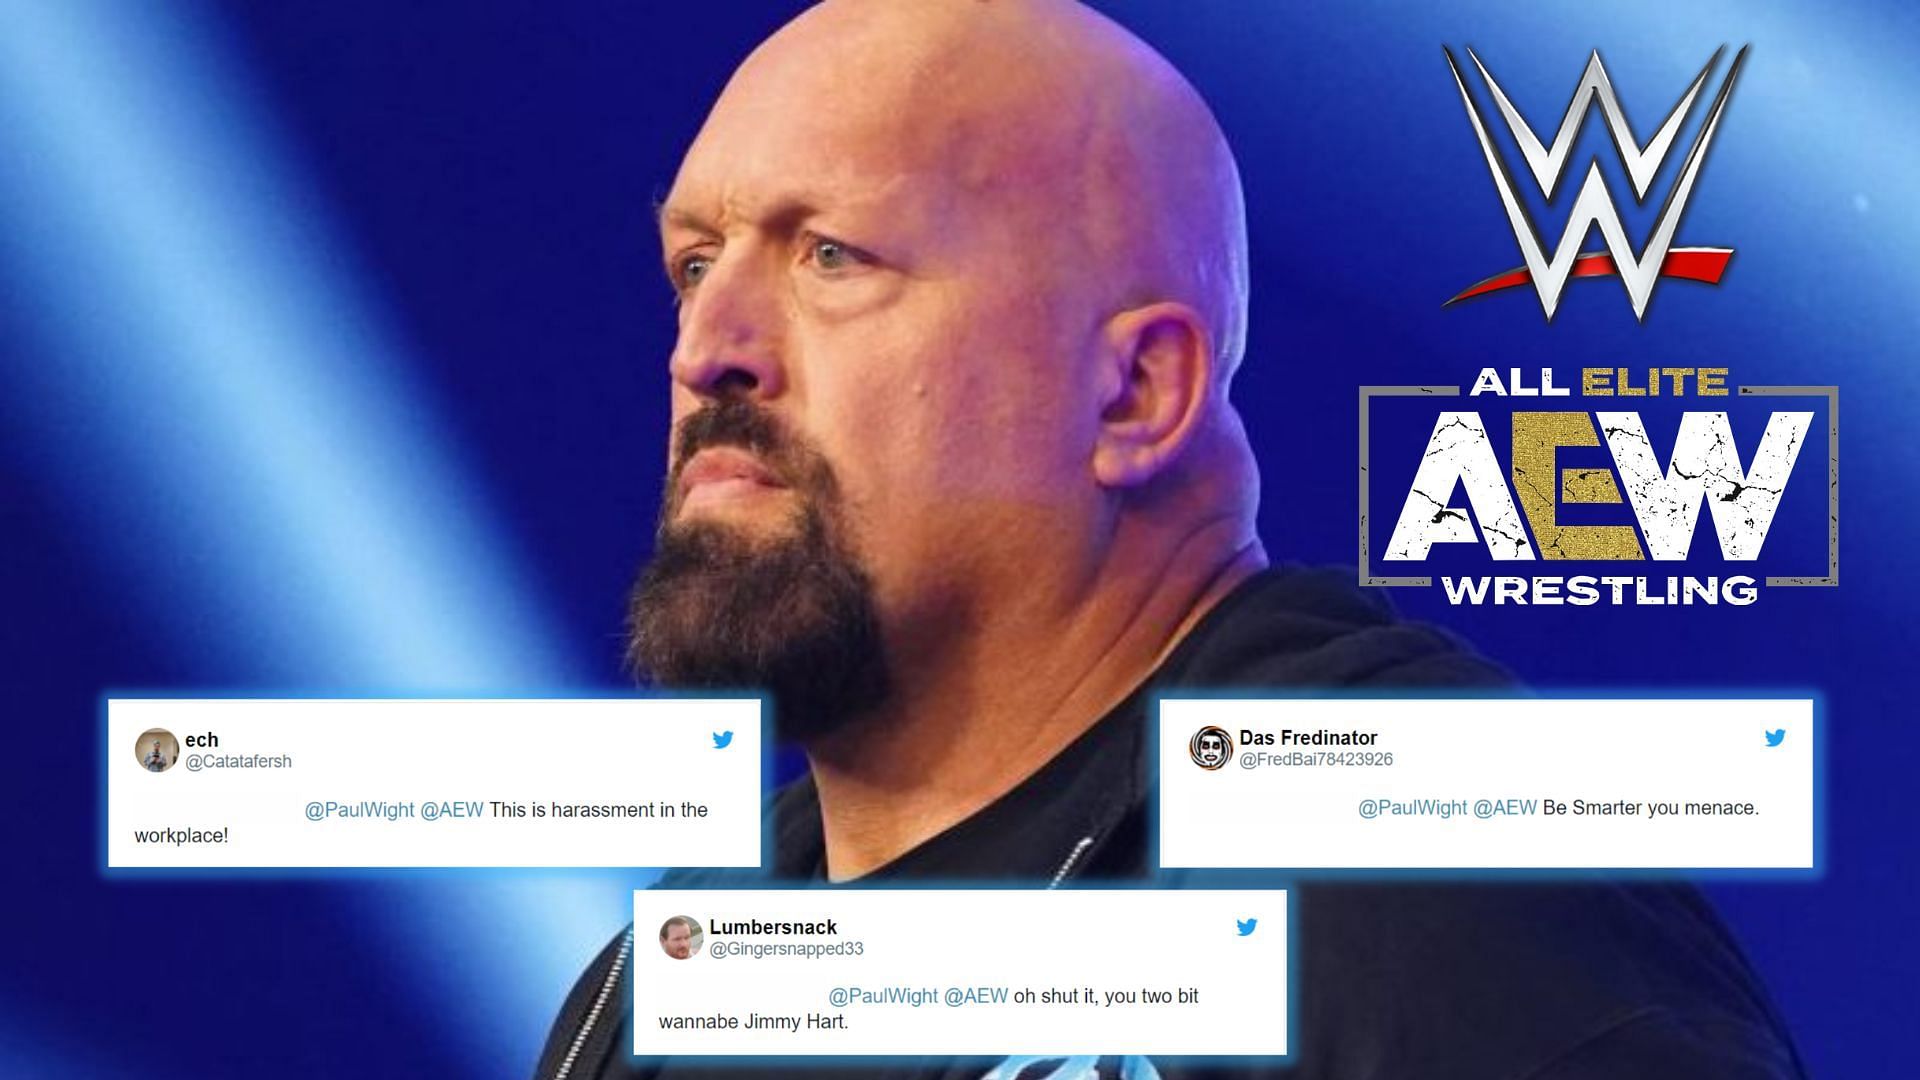 WWE legend Paul Wight came under fire recently